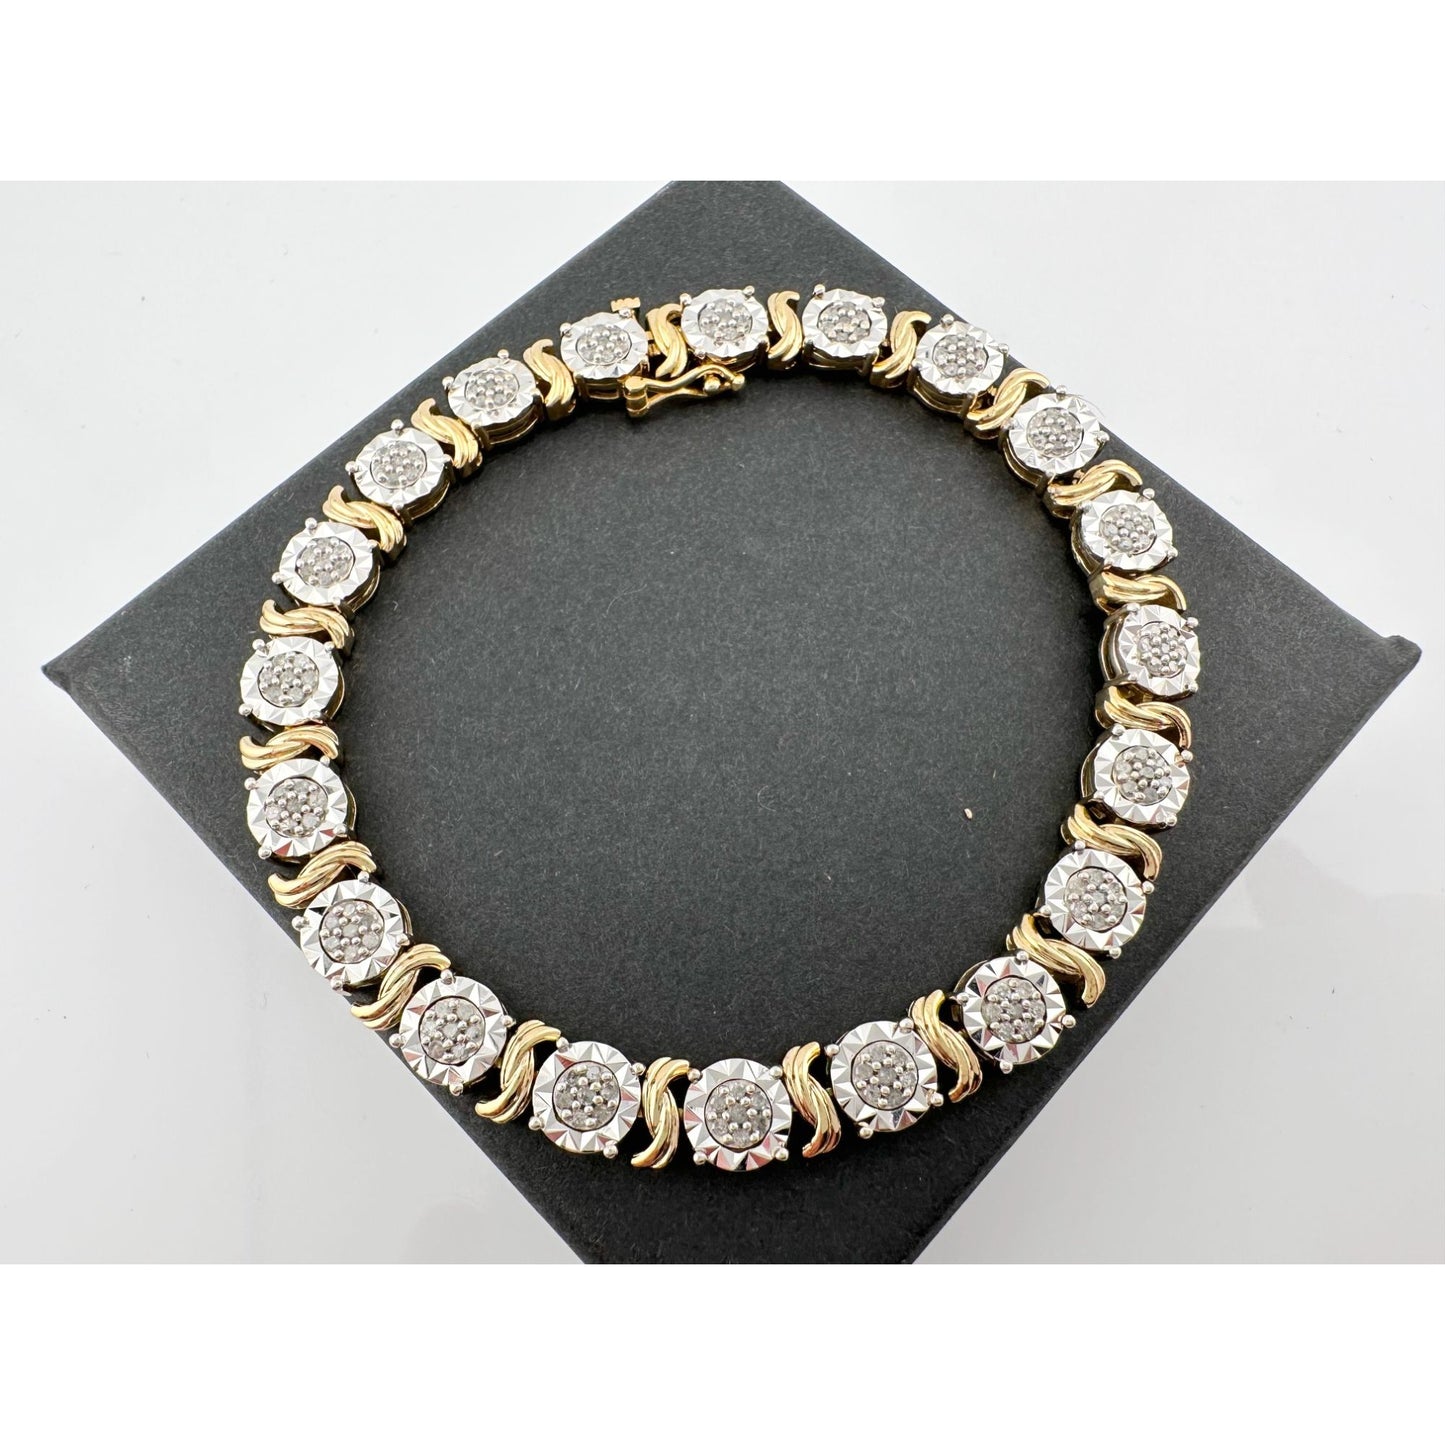 Beautiful Two Tone 1 Ct Diamond Bracelet - Sterling Silver with Gold Plate S Curve Pattern